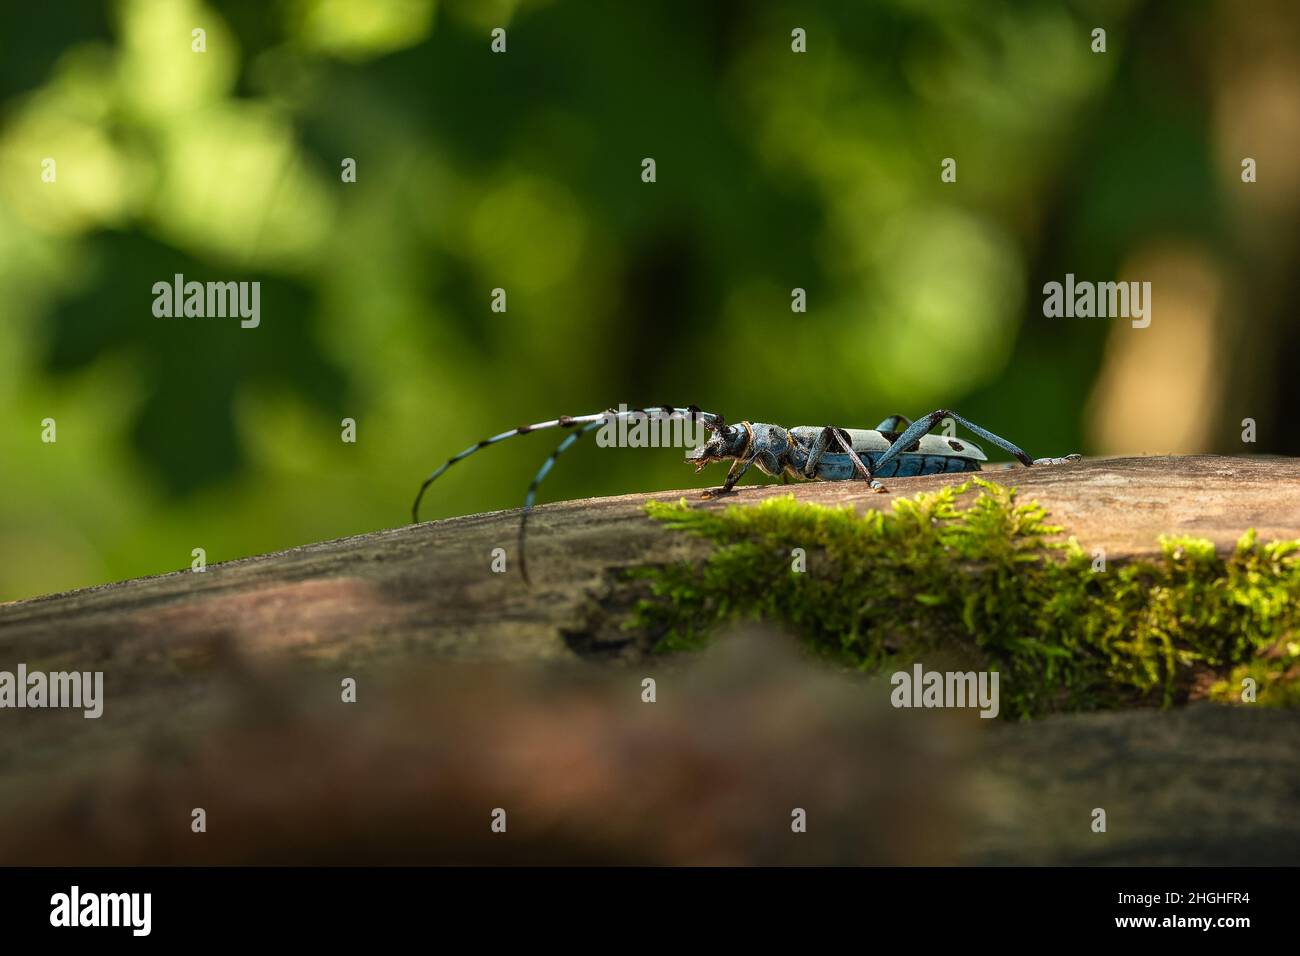 Close up image of the Alpine Longicorn, a blue beetle with black spots, sitting in the shadow of leaves on a tree trunk covered with moss. Stock Photo